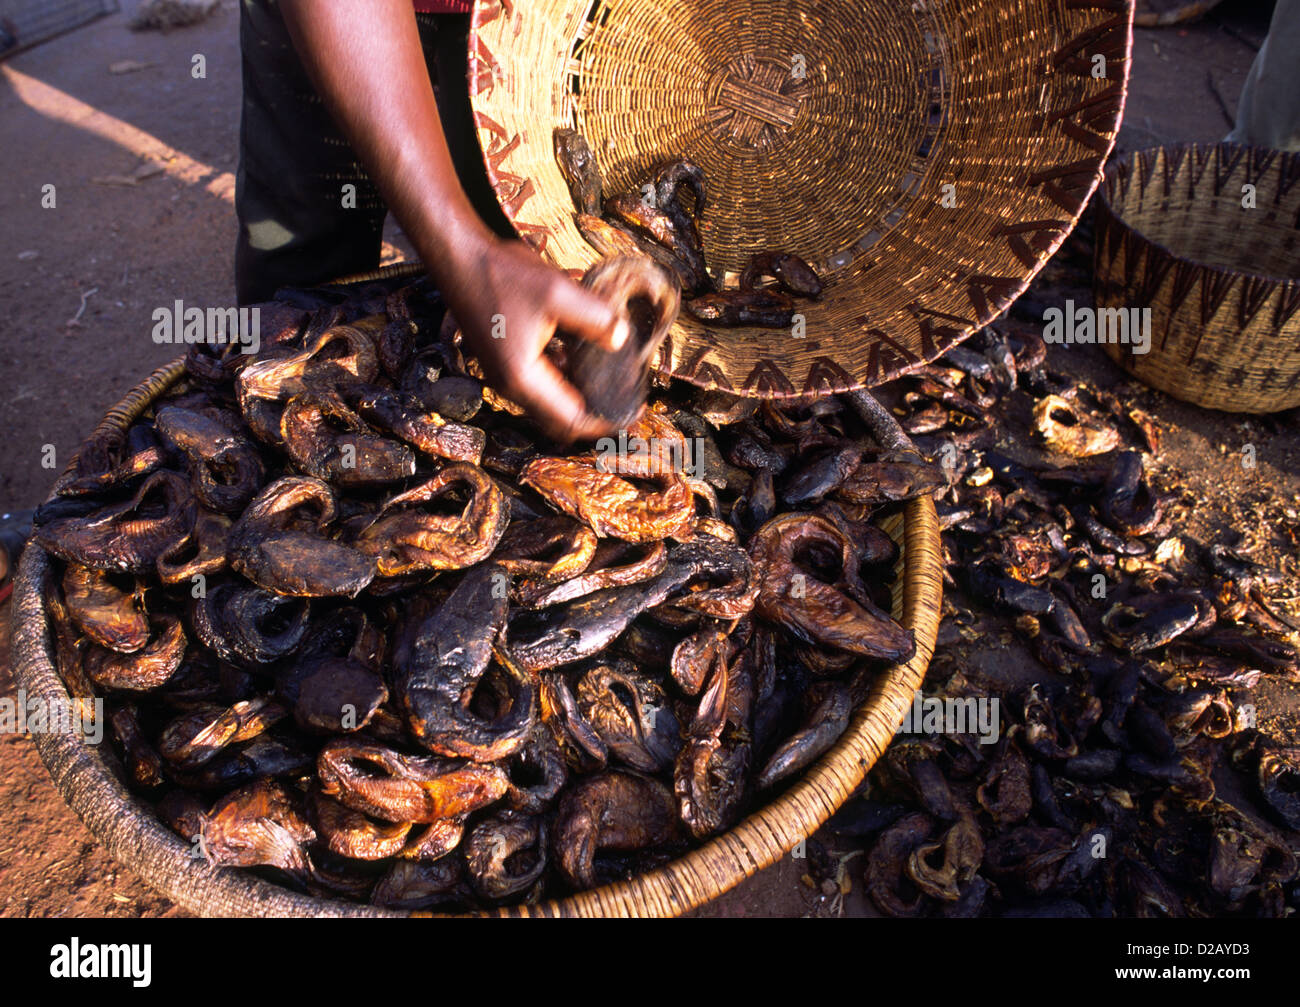 Dried fish at a street market in Mali, West Africa. Stock Photo